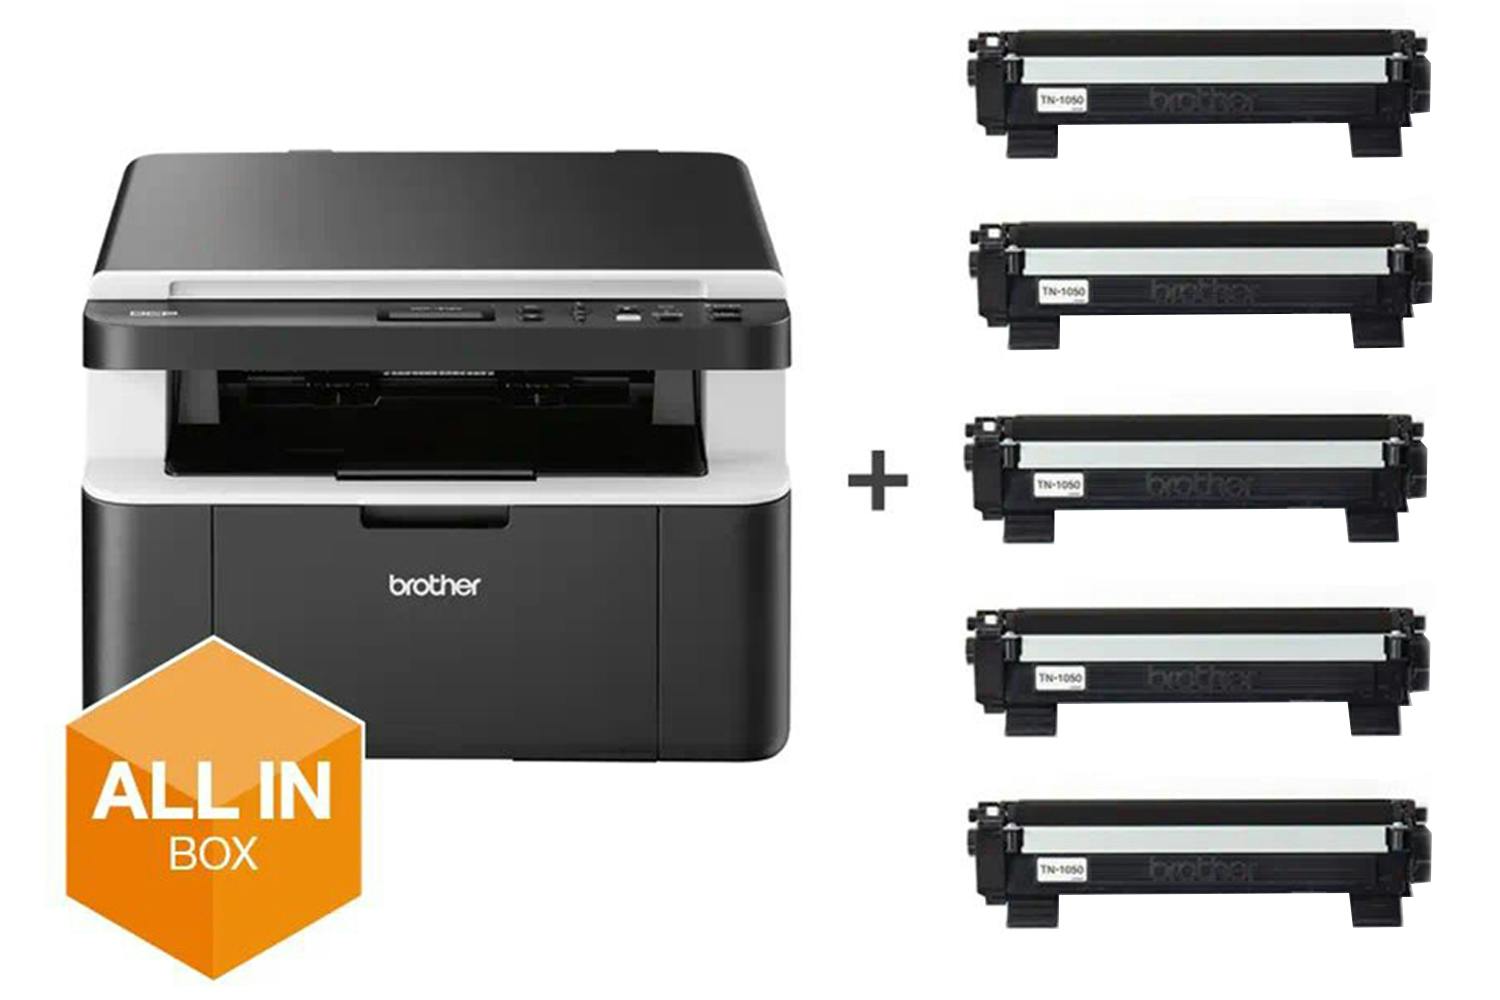 Brother DCP-1612W 3-in-1 Mono Laser Printer Bundle